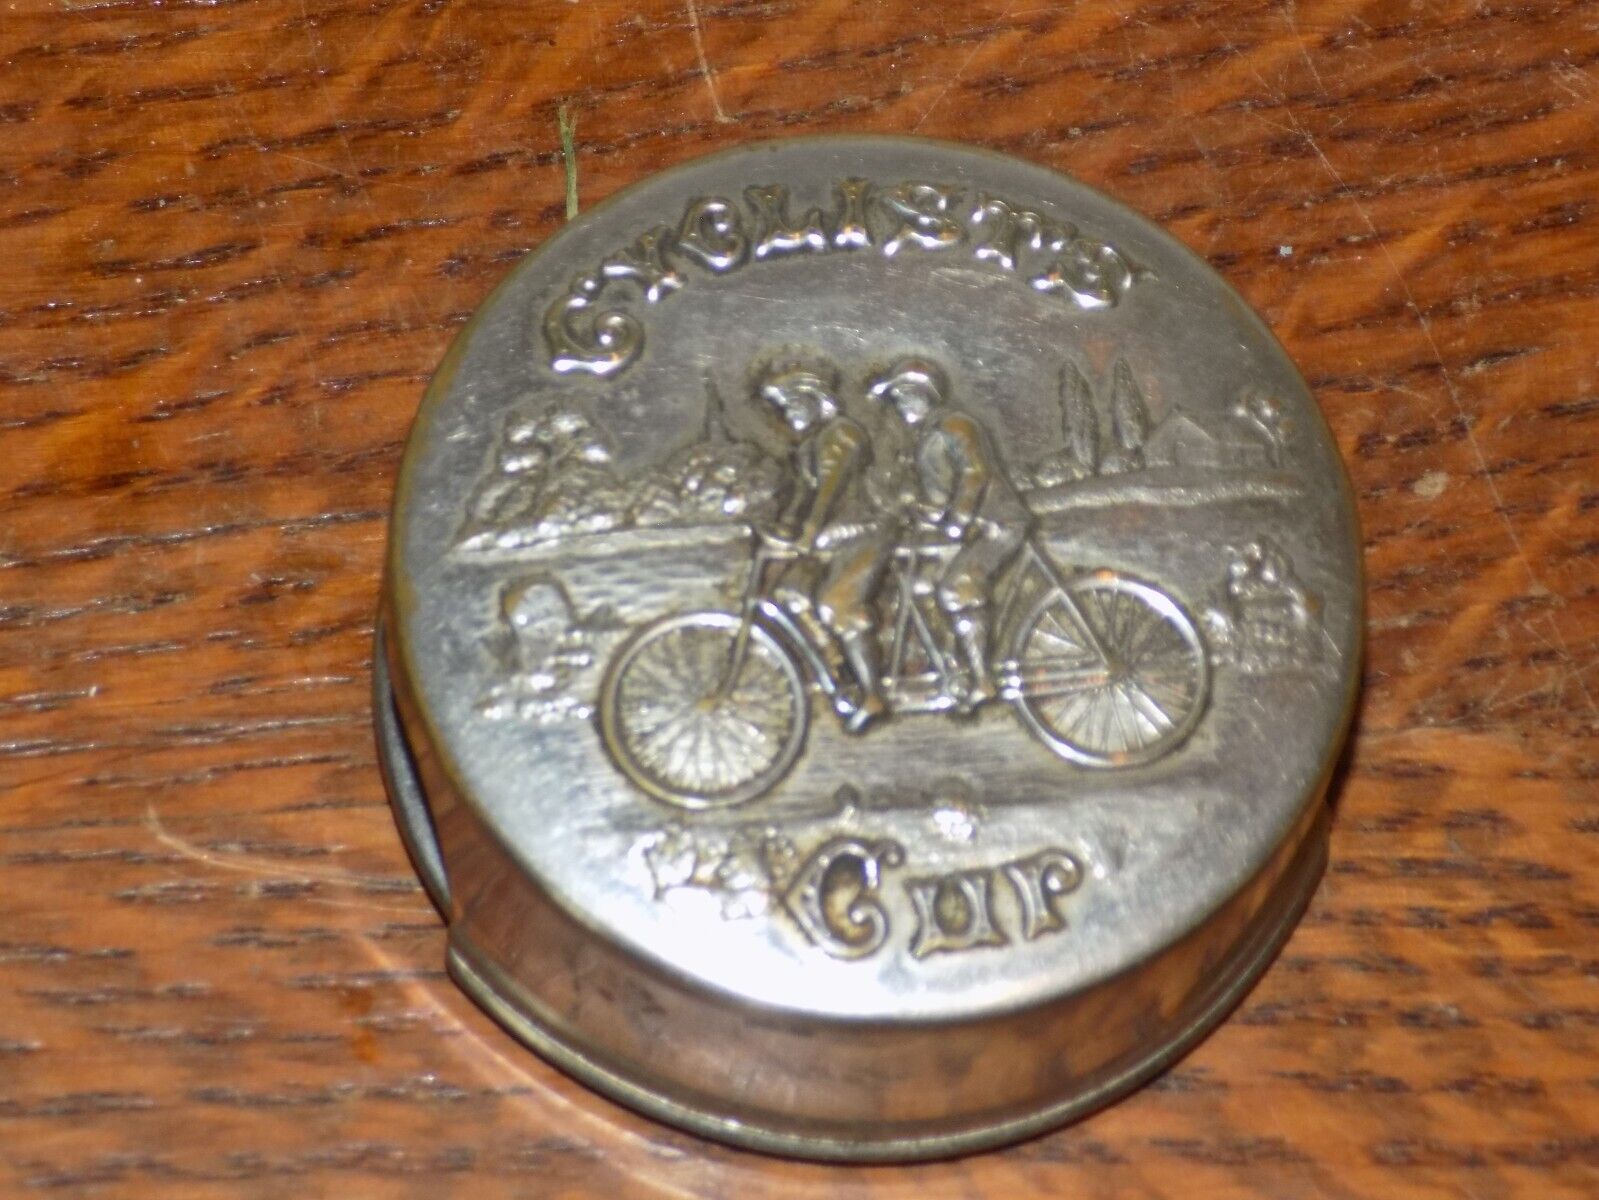 Vintage 1897 Cyclist Collapsible Cup